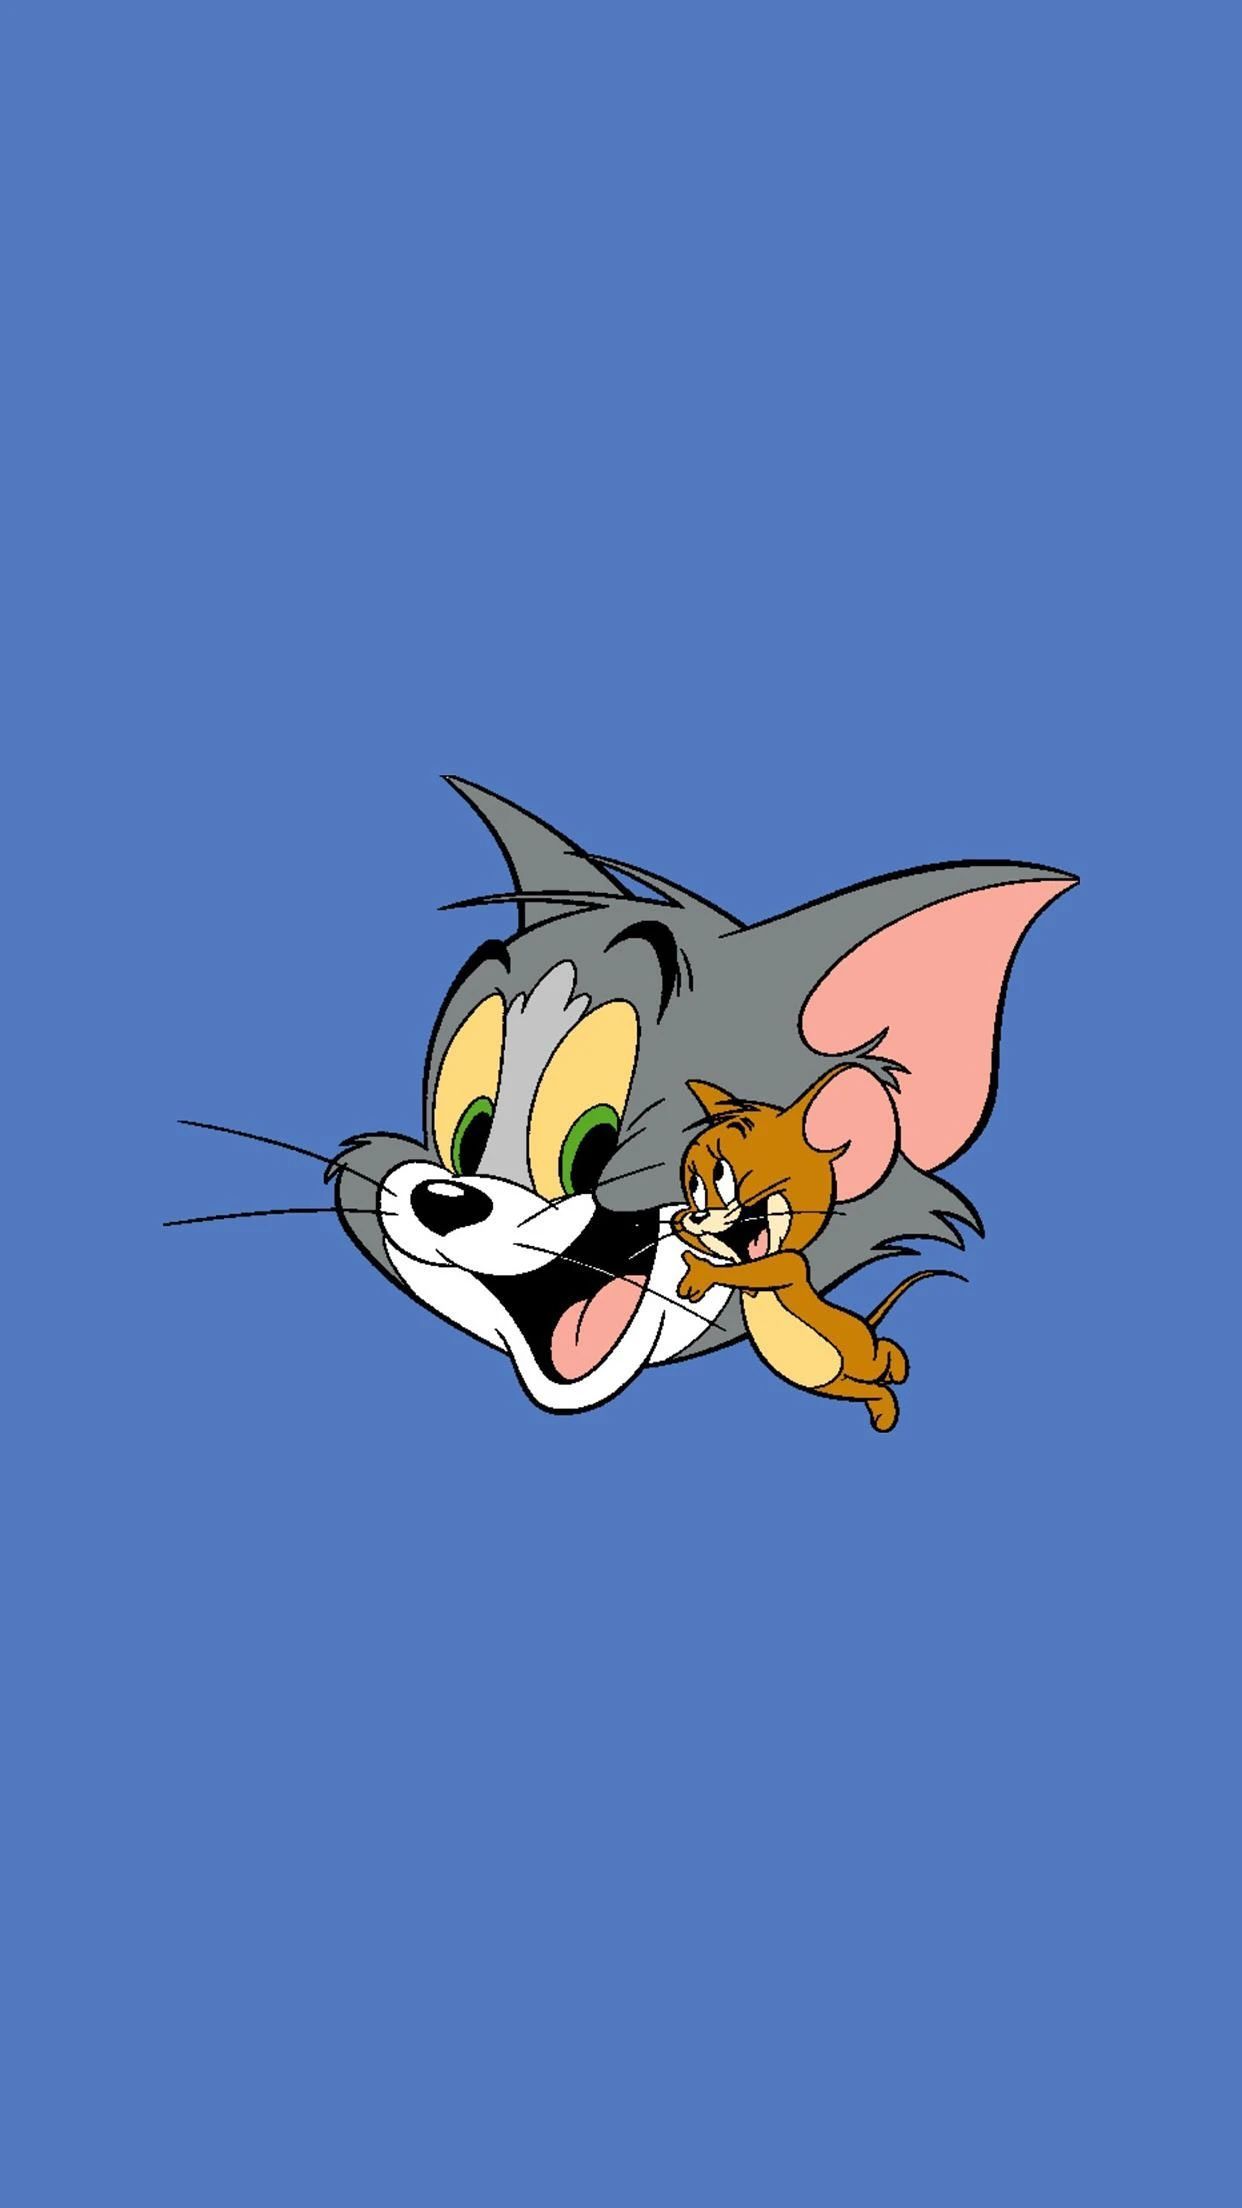 Phone Wallpaper to Commemorate Tom and Jerry's Animator Gene Deitch. Tom and jerry photo, Tom and jerry wallpaper, Tom and jerry picture